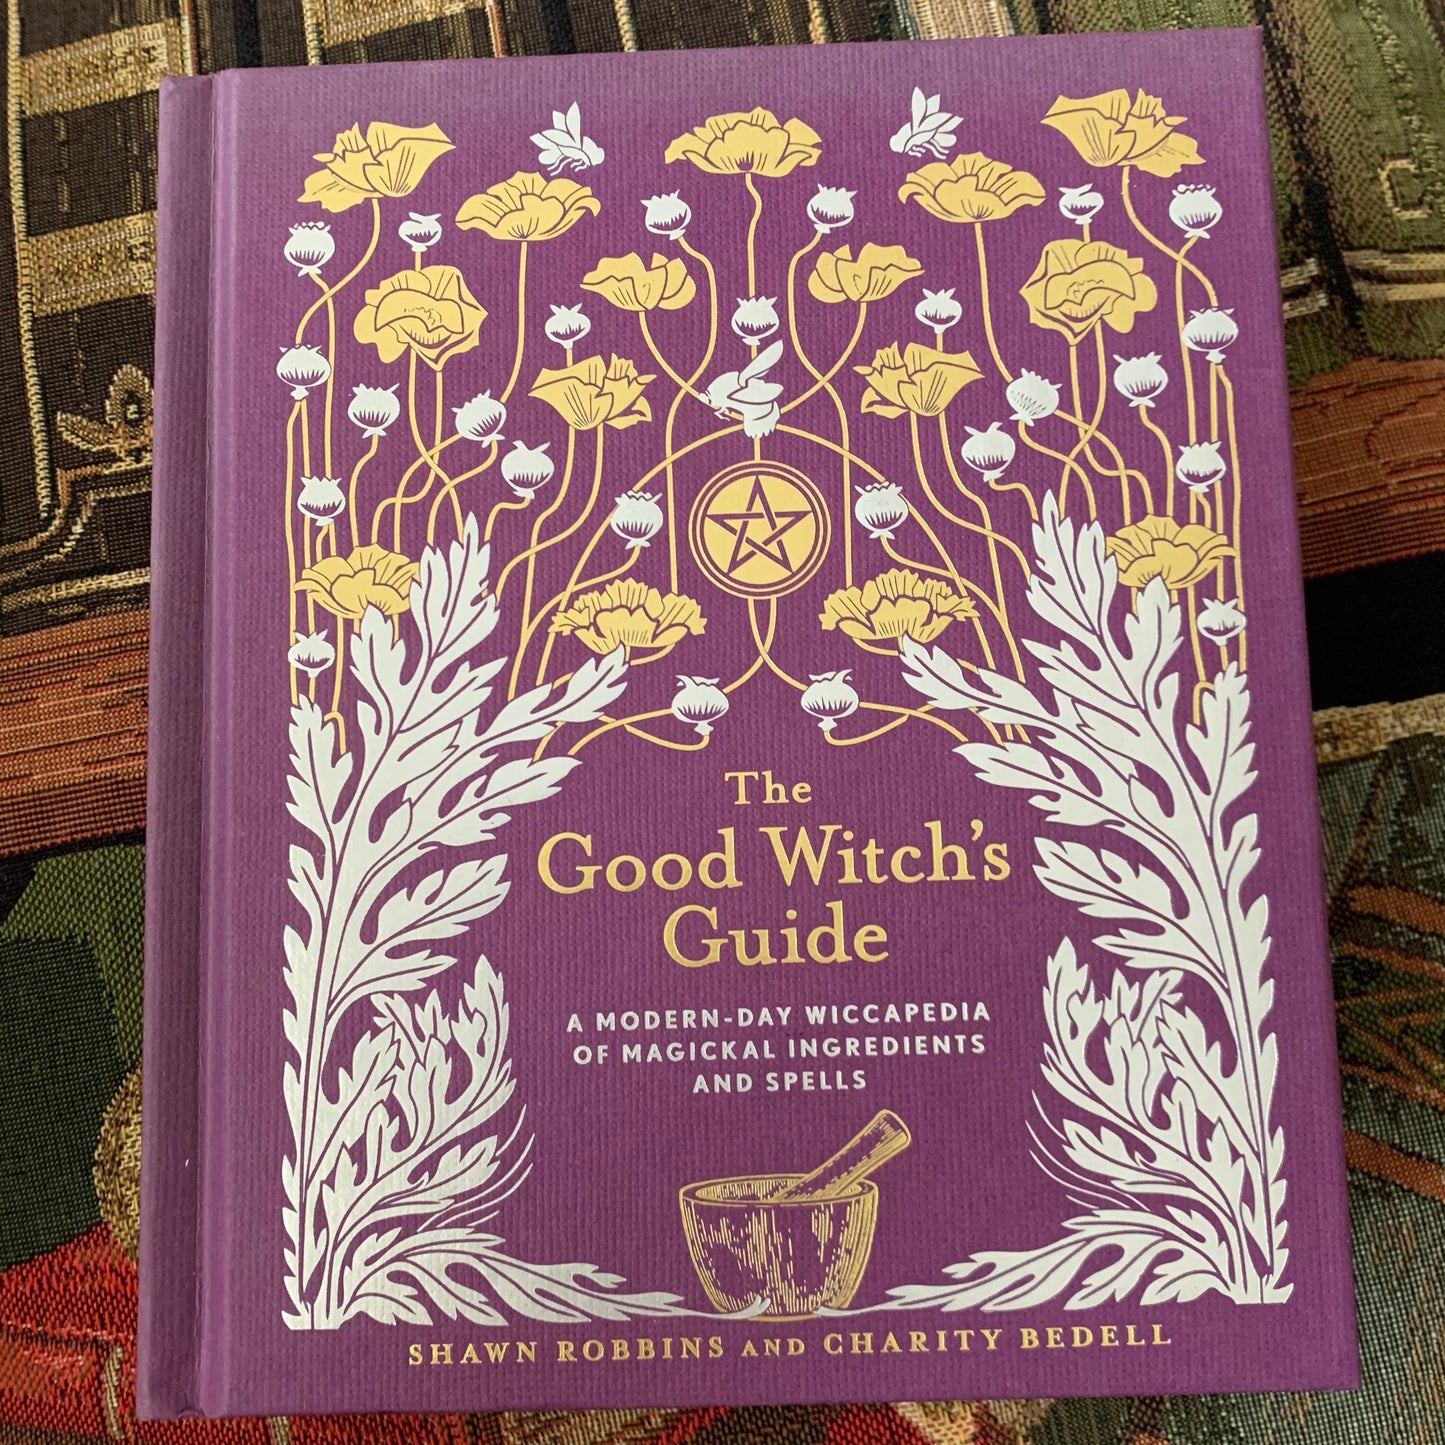 GOOD WITCH'S GUIDE  (HARDCOVER) A MODERN-DAY WICCAPEDIA OF MAGICKAL INGREDIENTS  AND SPELLS